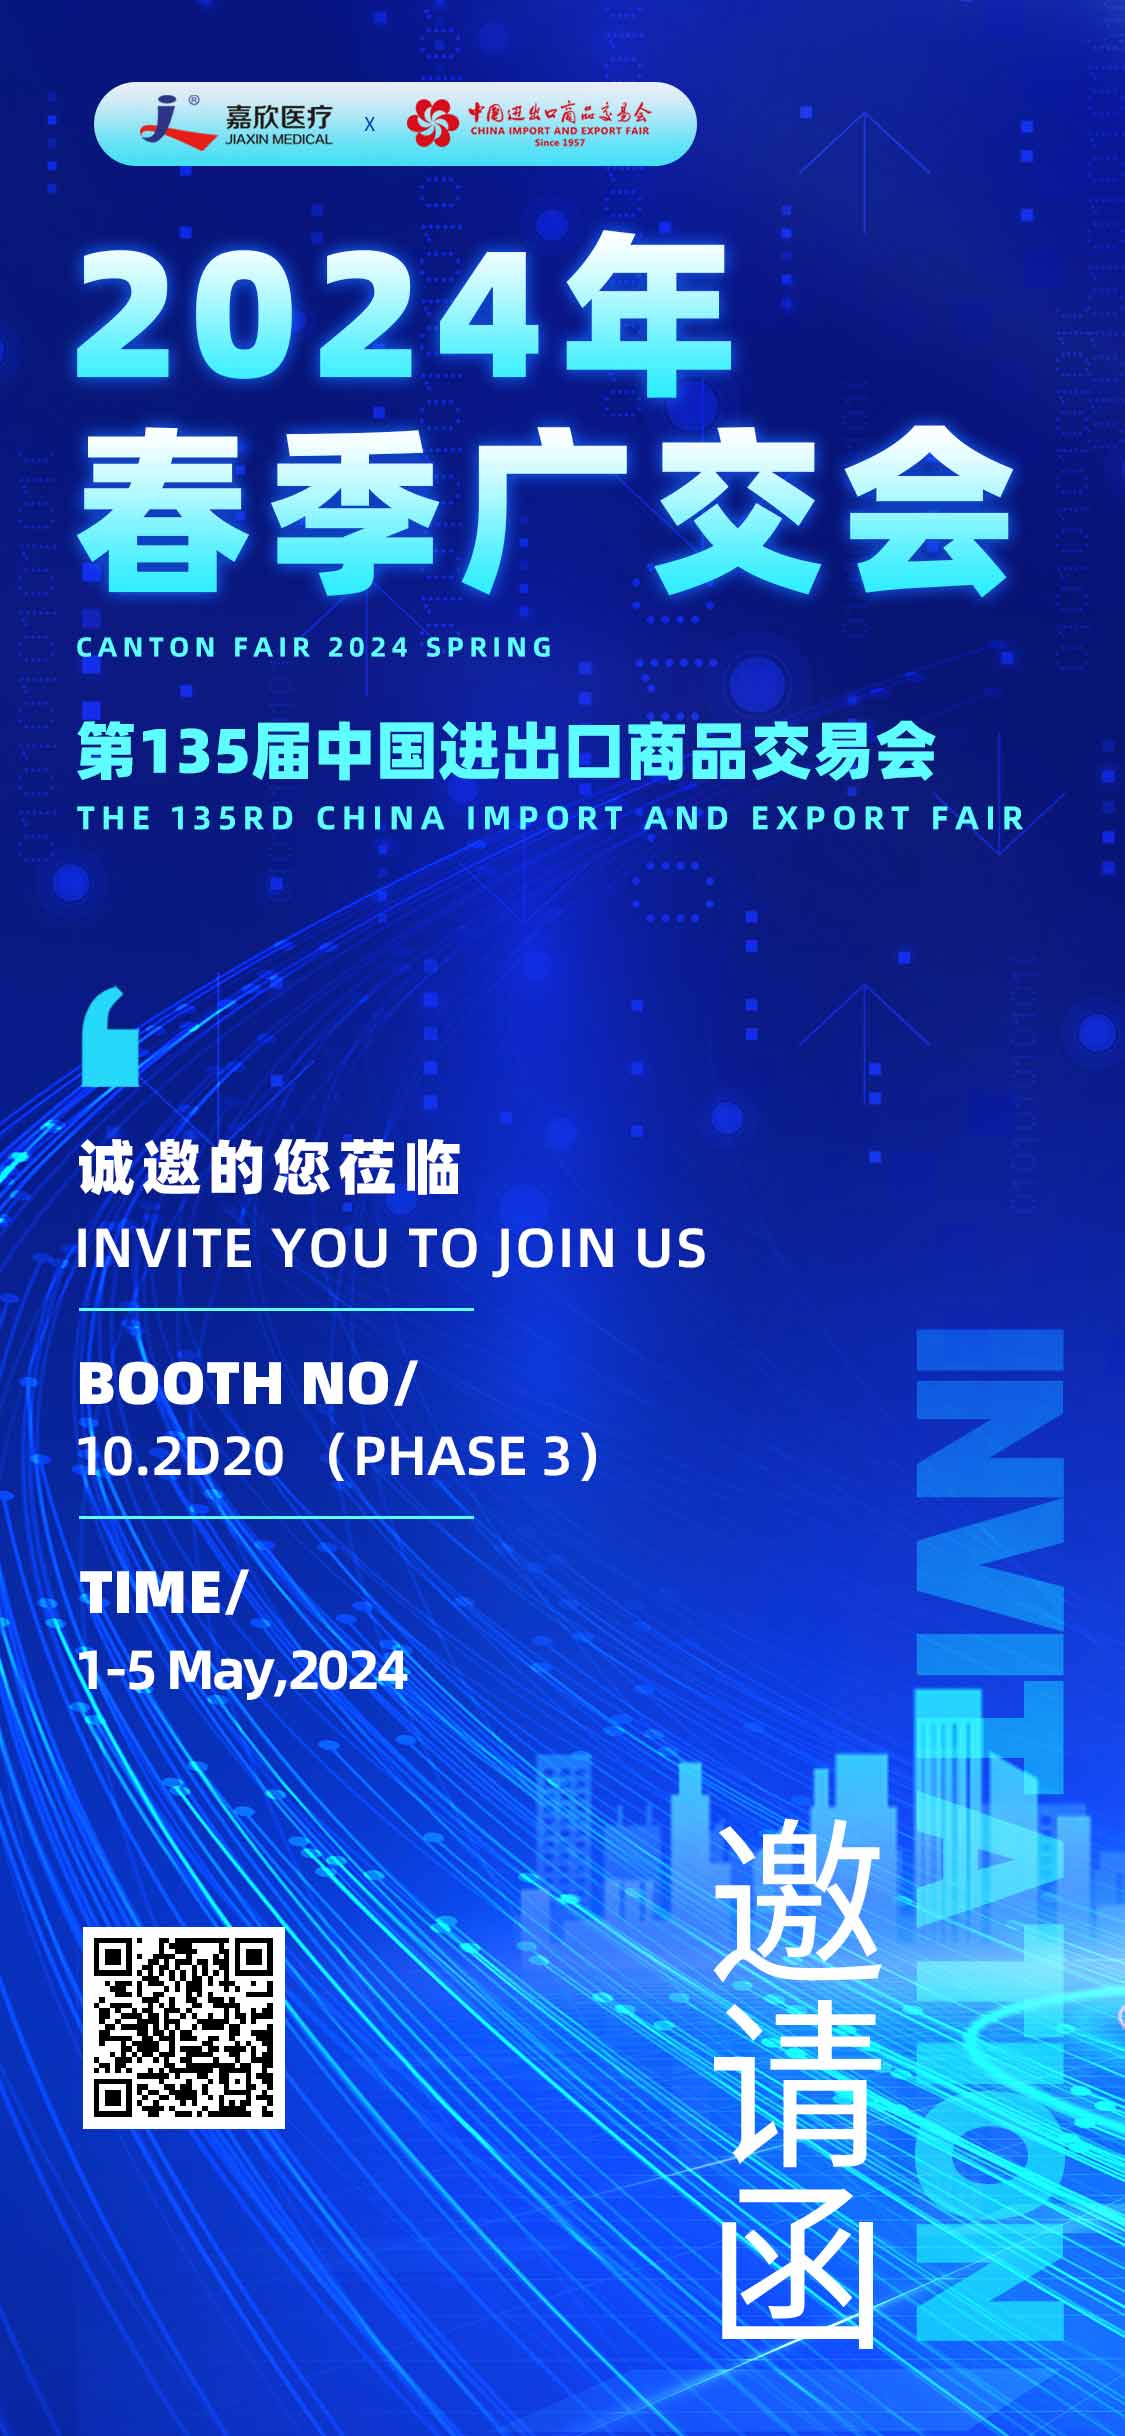 Ready for the Spring Canton Fair Phase III? Discover the Latest in Jiaxin Medical!